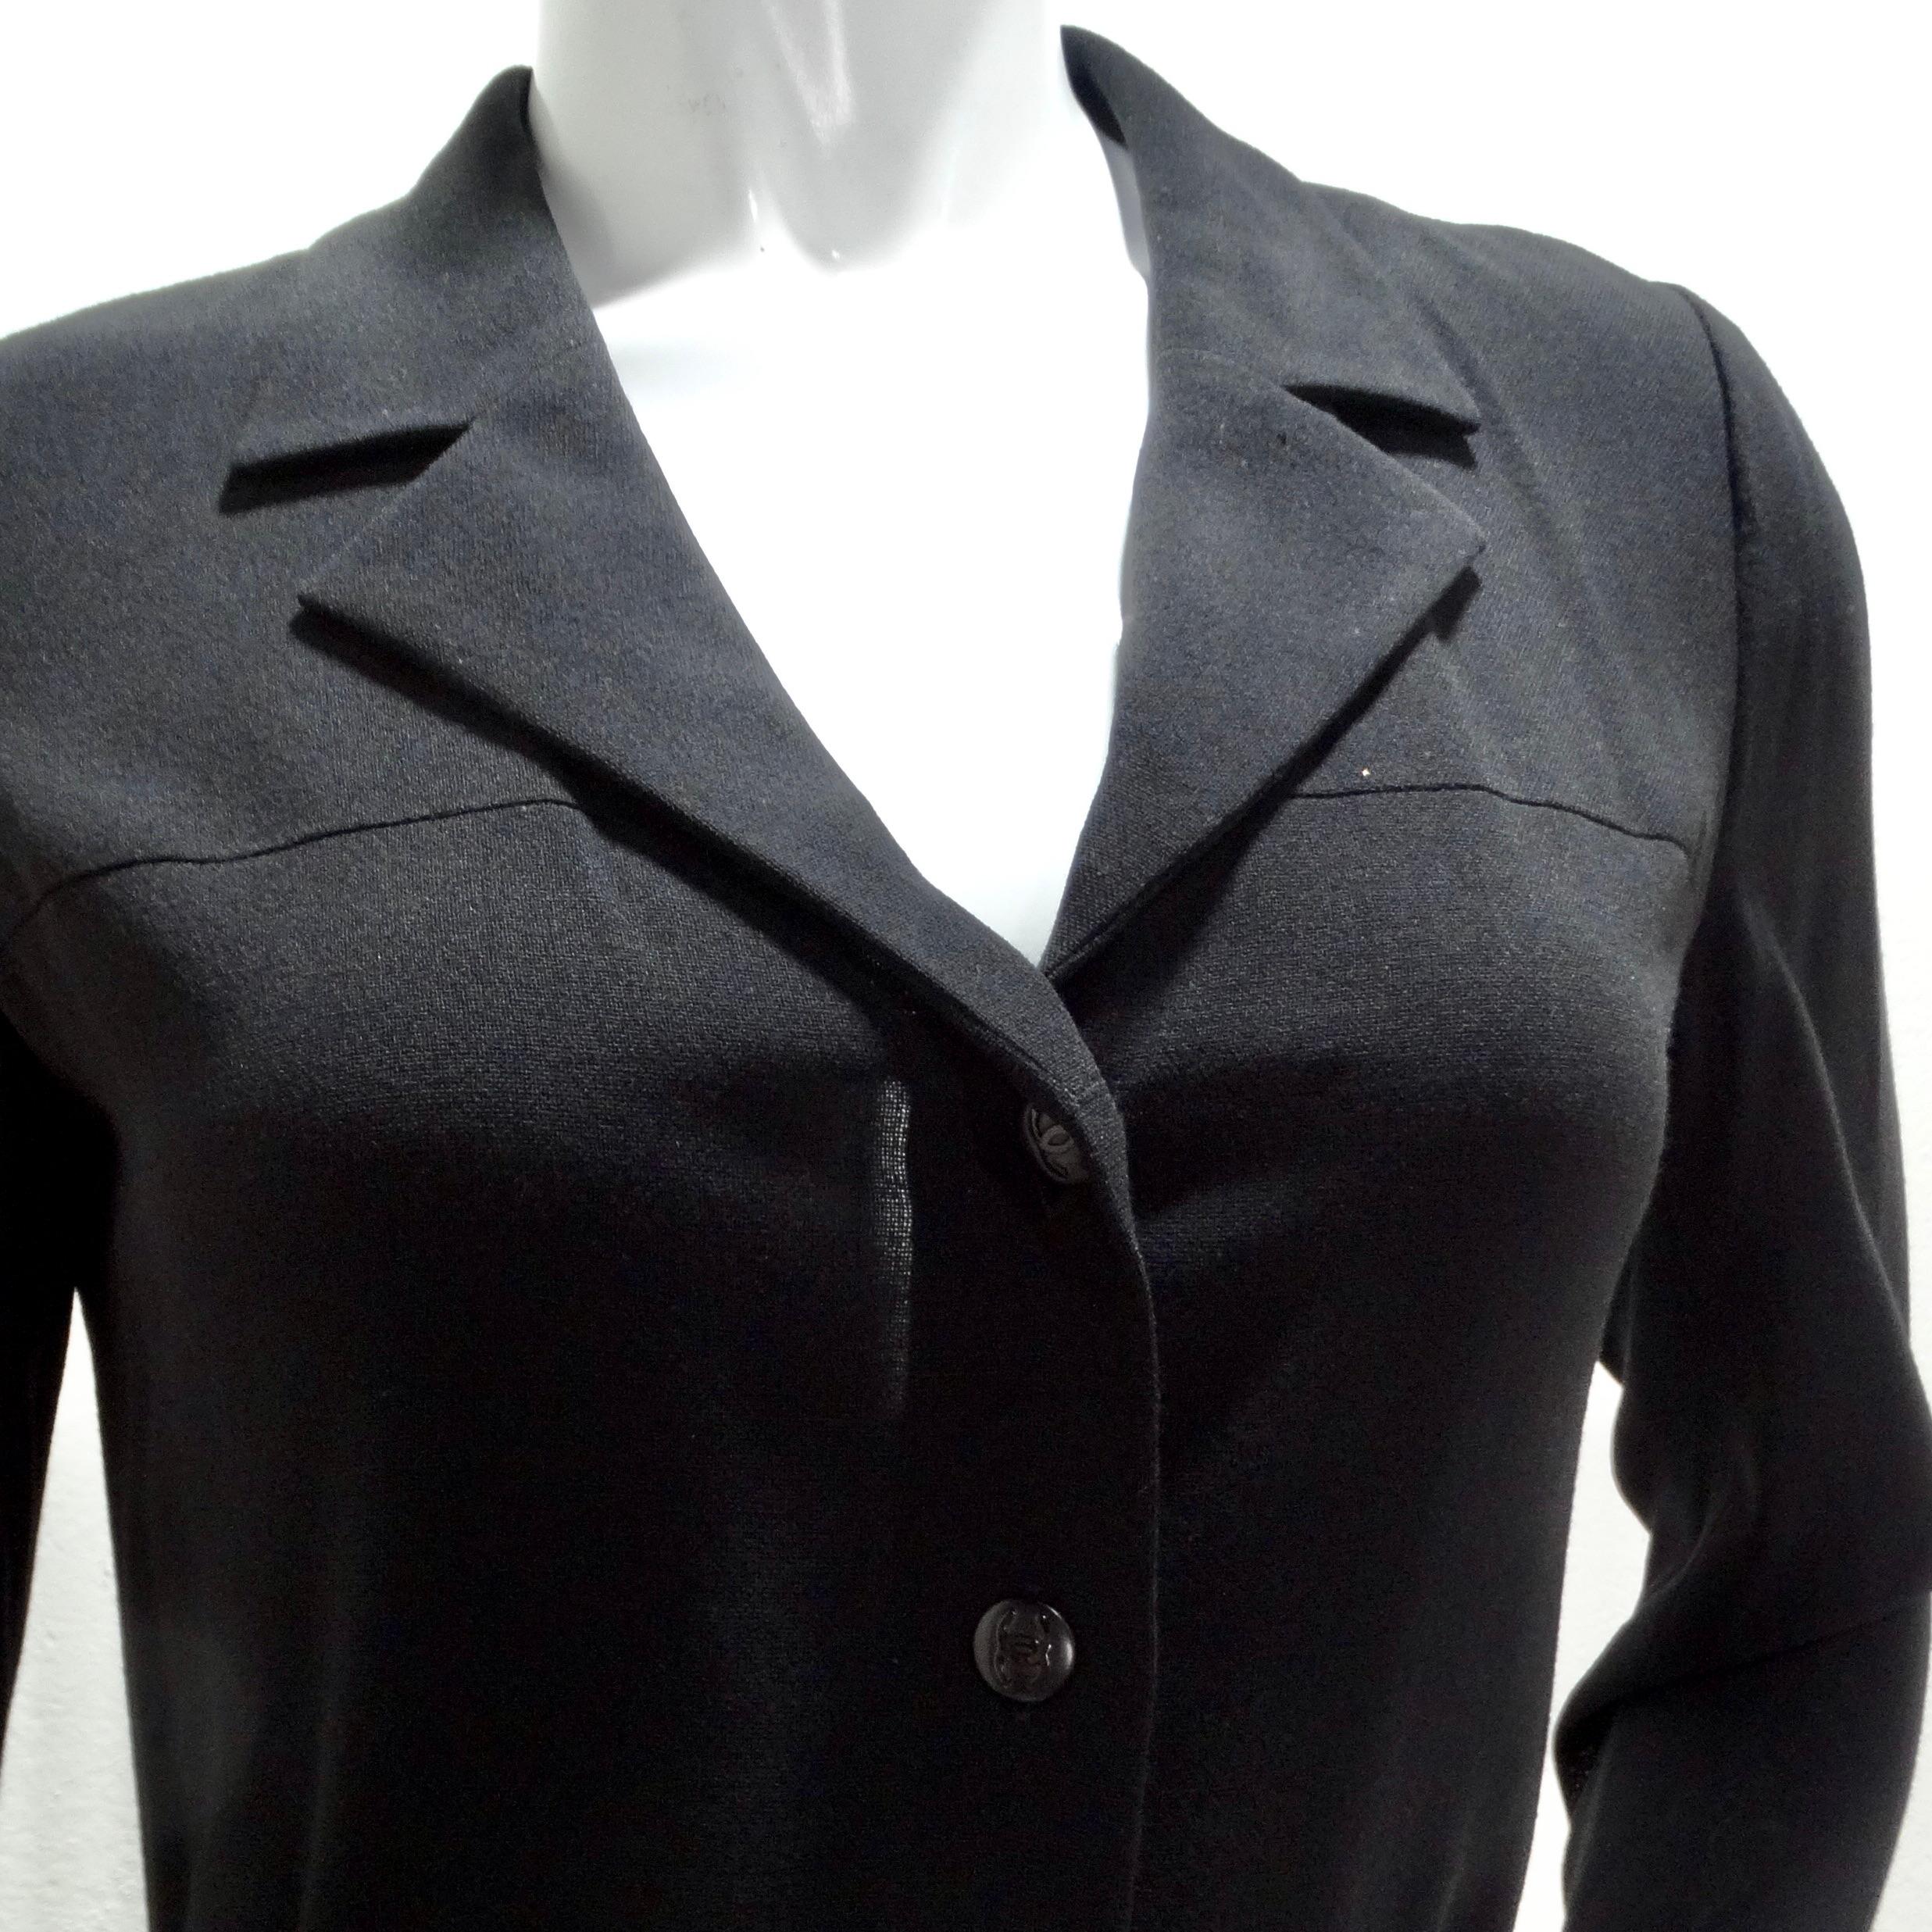 Chanel 2004 Black Button Up Collared Dress and Belt In Good Condition For Sale In Scottsdale, AZ